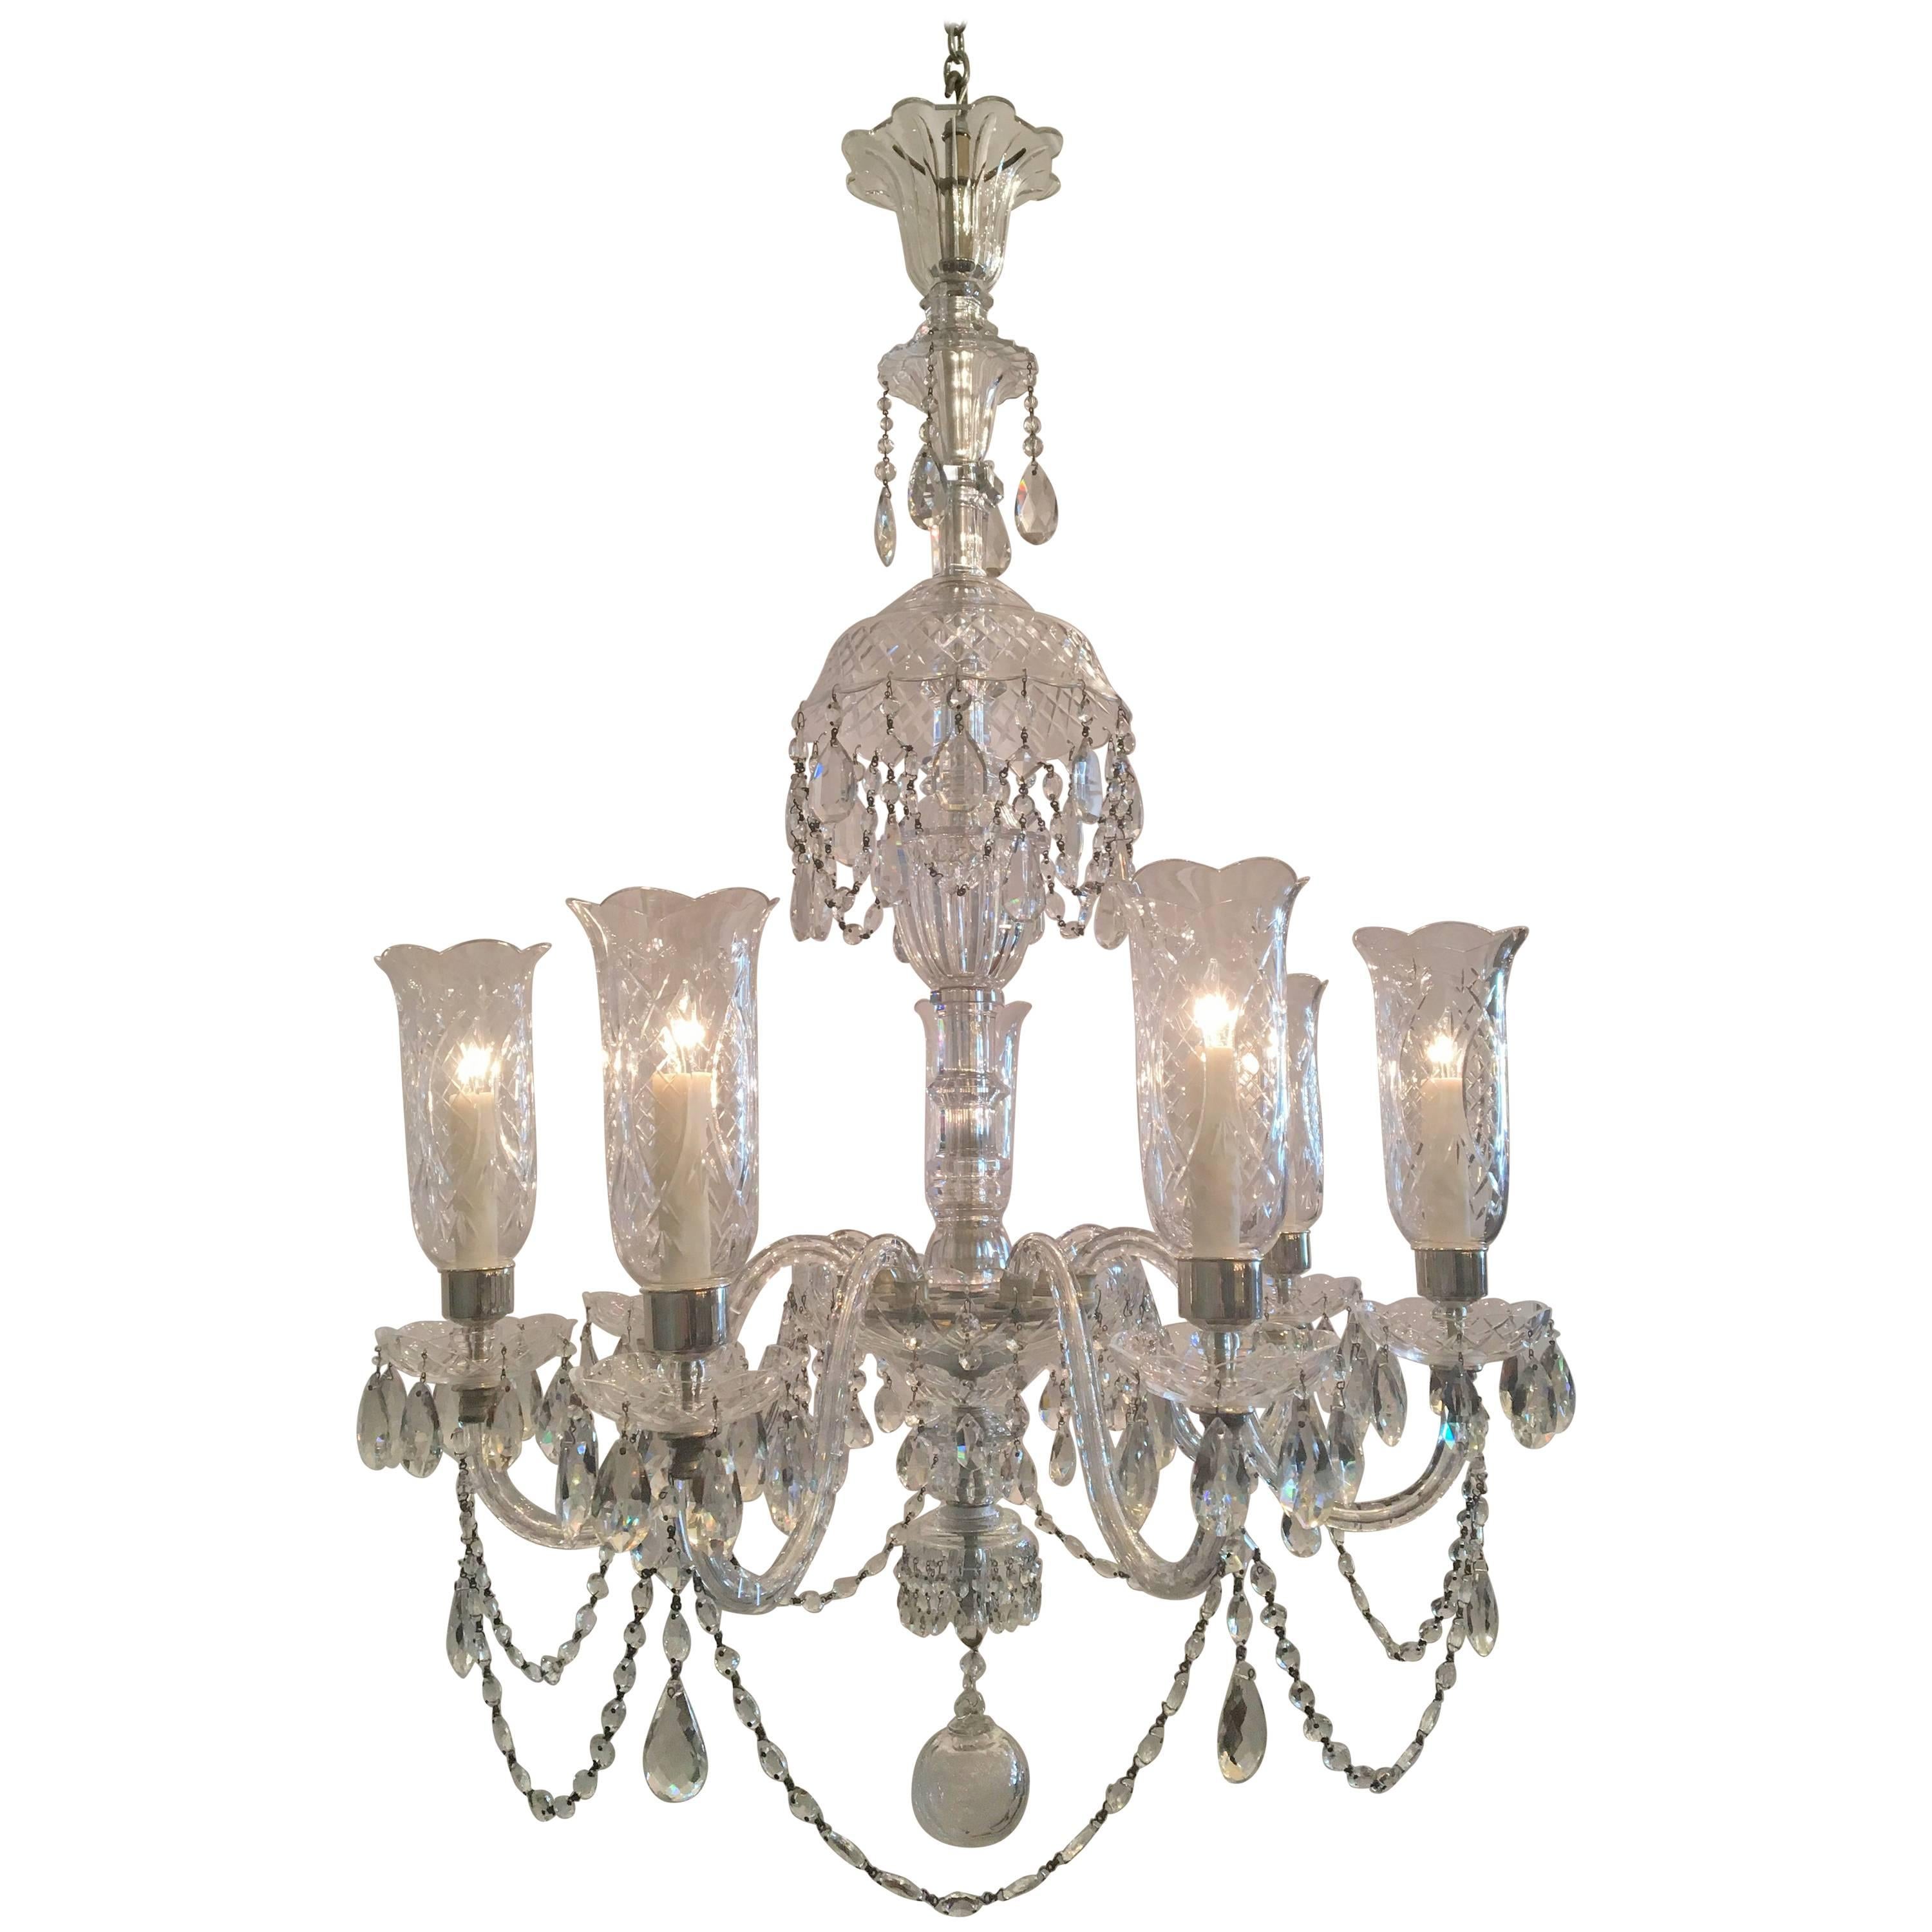 Early 20th Century Irish Crystal Chandelier with Hurricane Shades